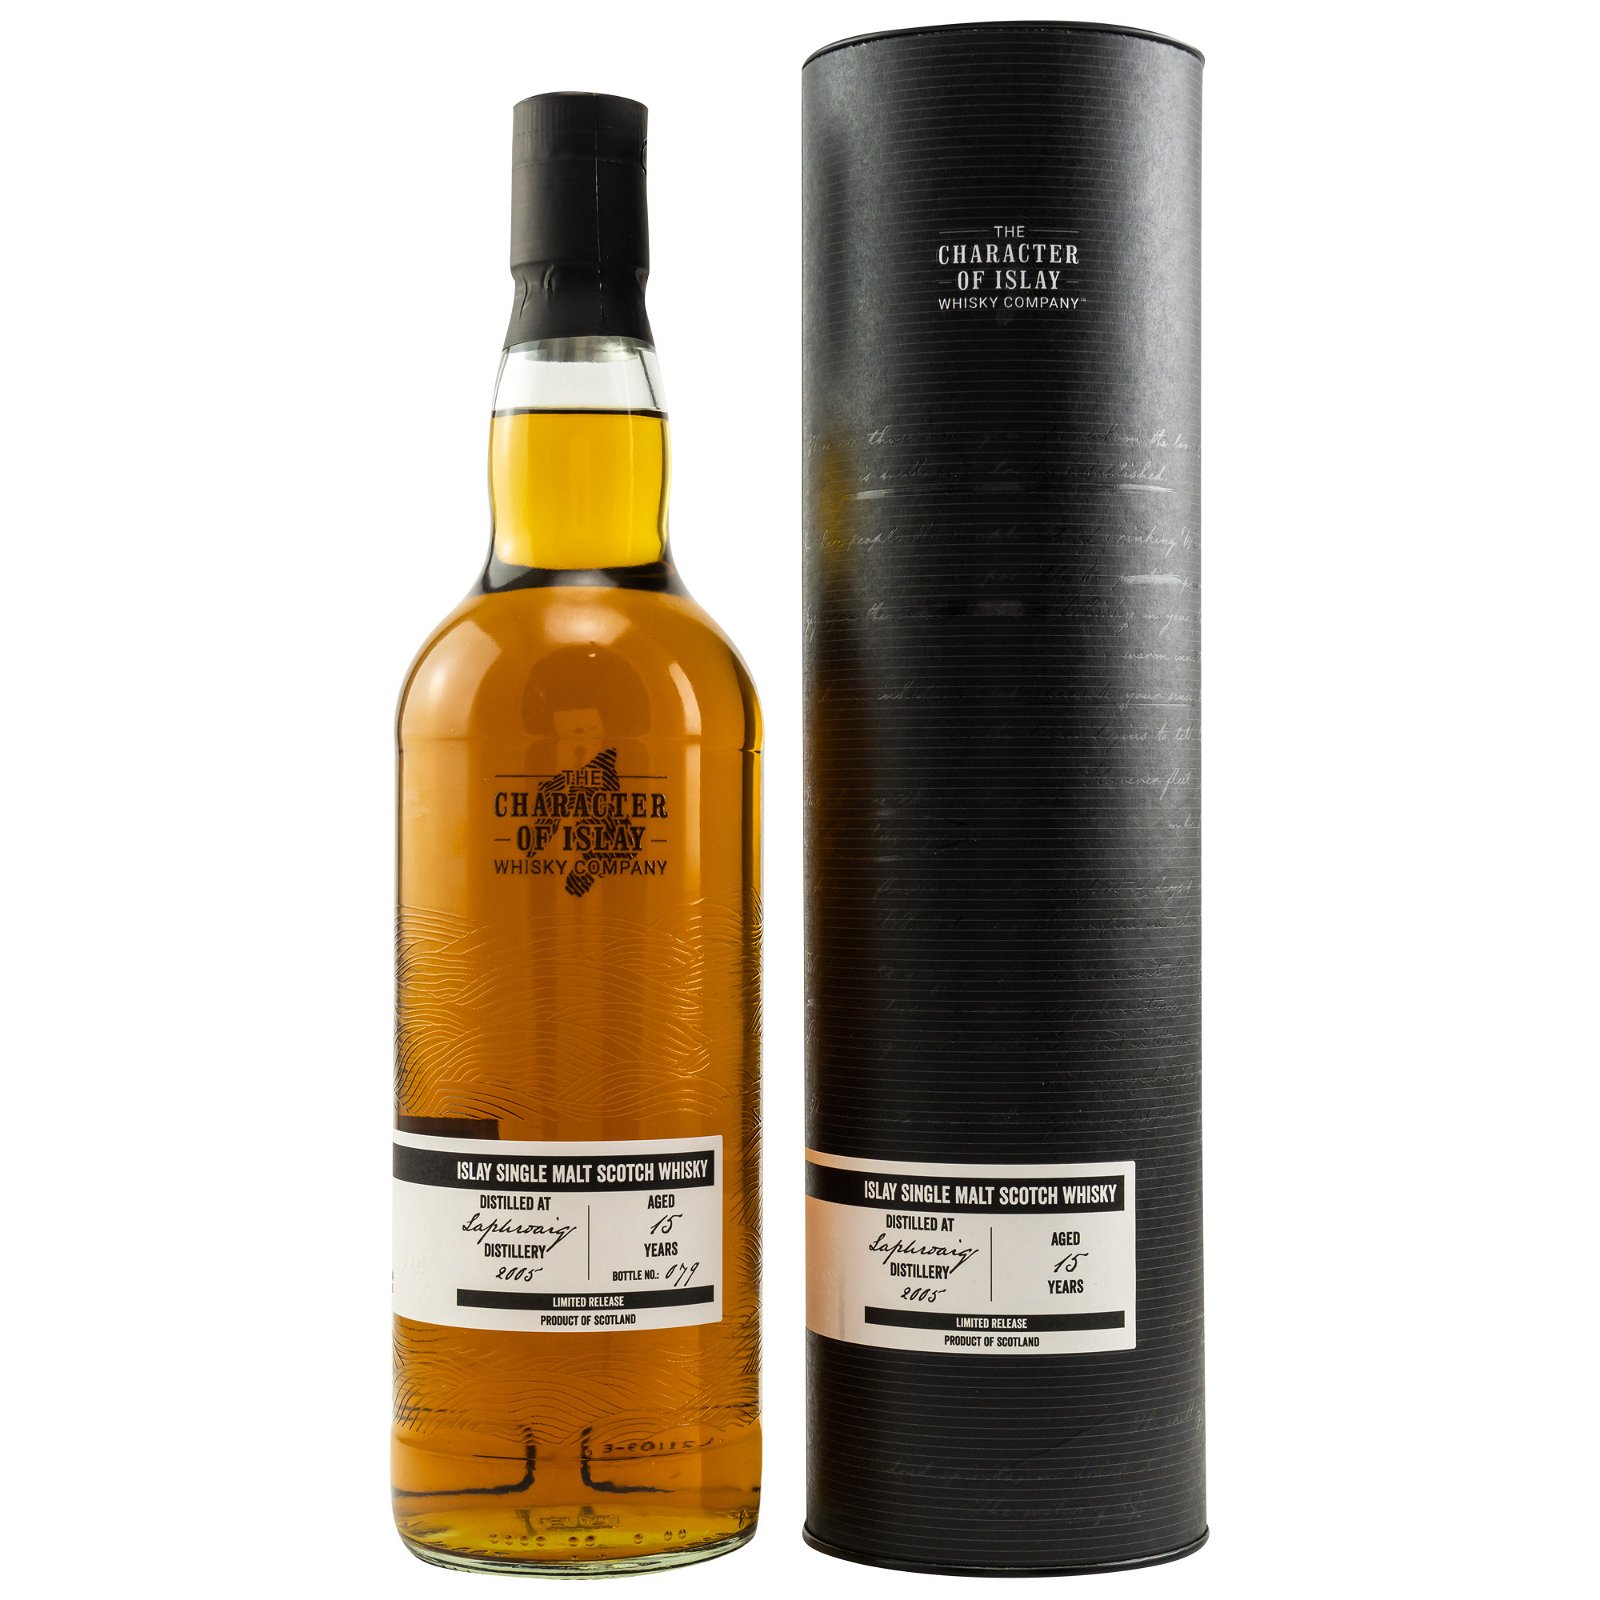 Laphroaig 2005 - 15 Jahre Cask No. 11680 (The Character of Islay Whisky Company)